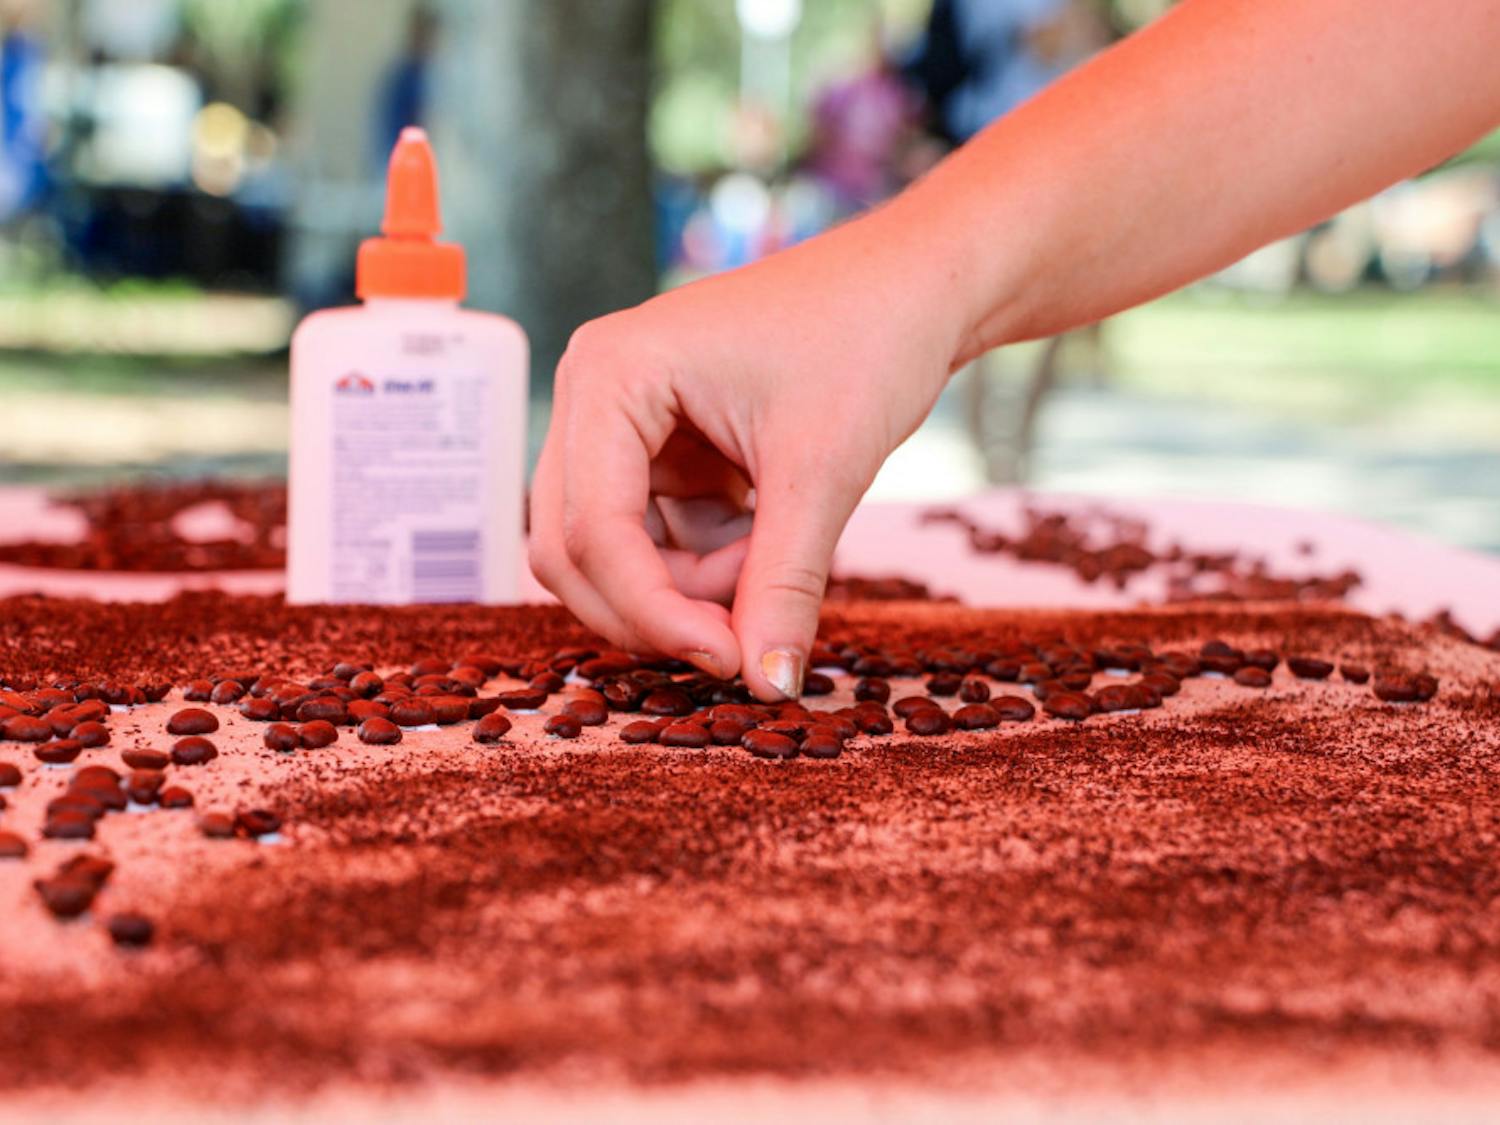 Carley Carbary, a 19-year-old UF religion freshman, places a bean in UF Social Street Team’s community art project (the state of Florida made up of coffee beans) on the Plaza of the Americas on Thursday in honor of National Coffee Day. Limited-edition buttons were given to those who contributed a bean to the project.